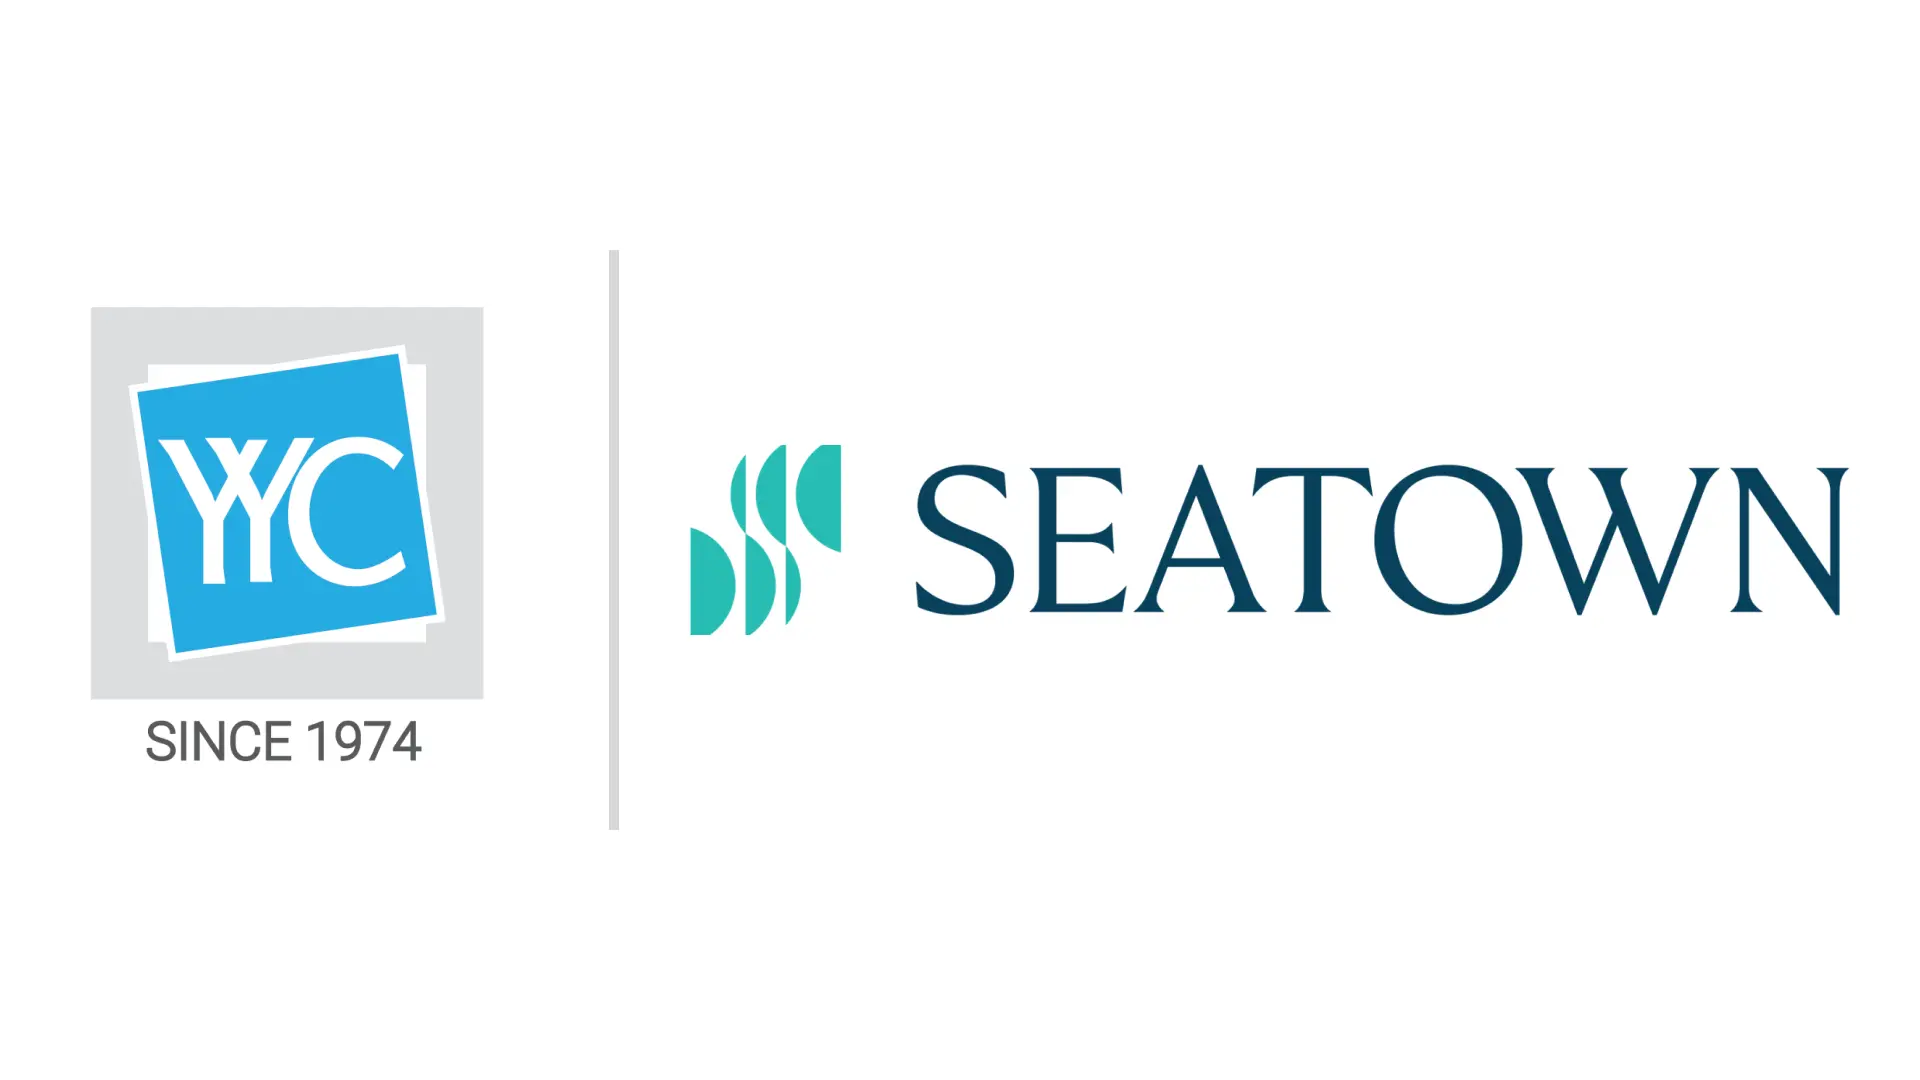 YYC and Seatown Logo